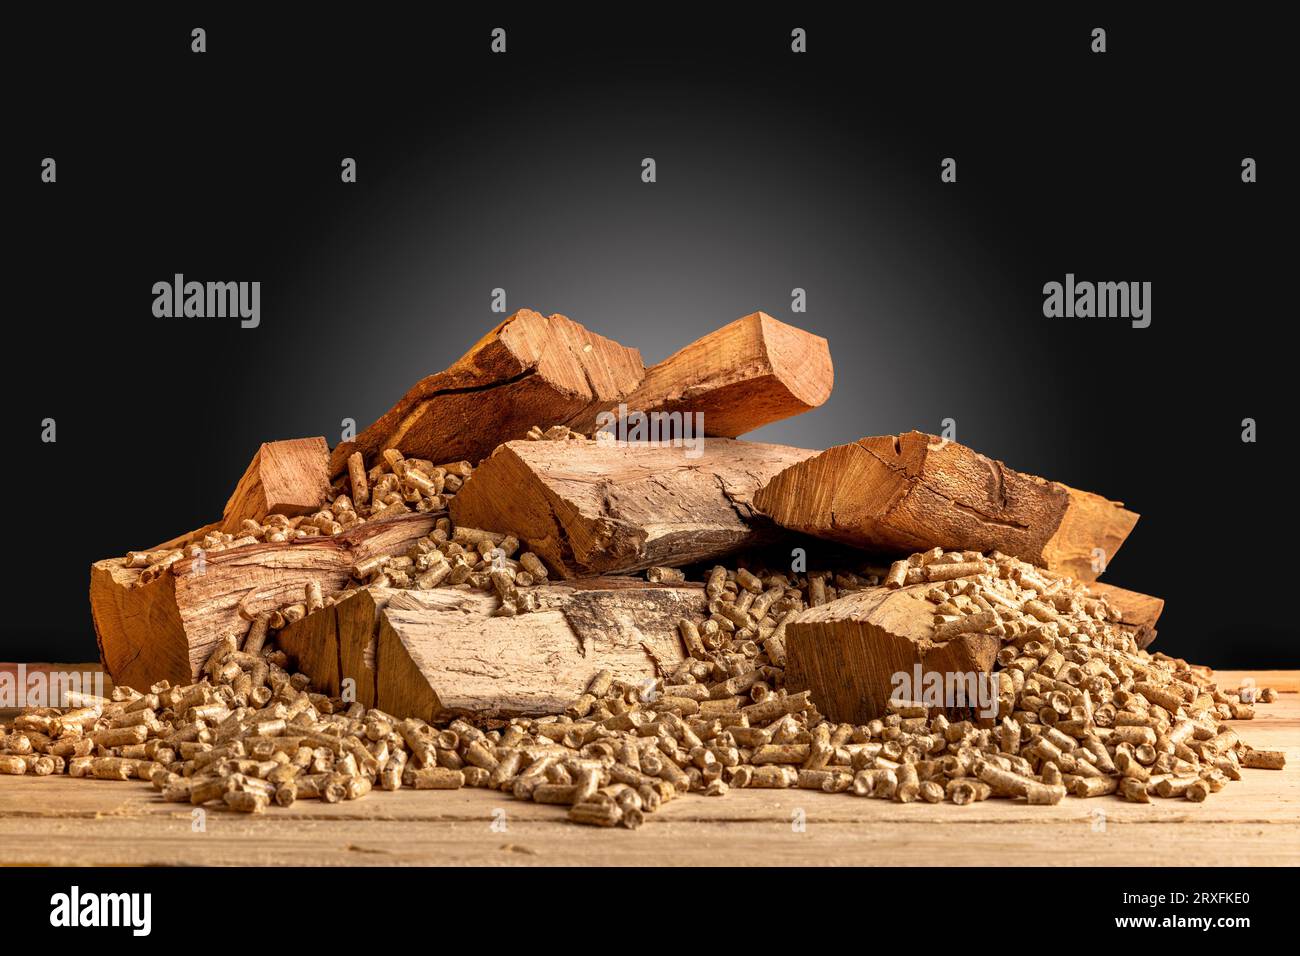 wood pellets and logs on a dark background Stock Photo